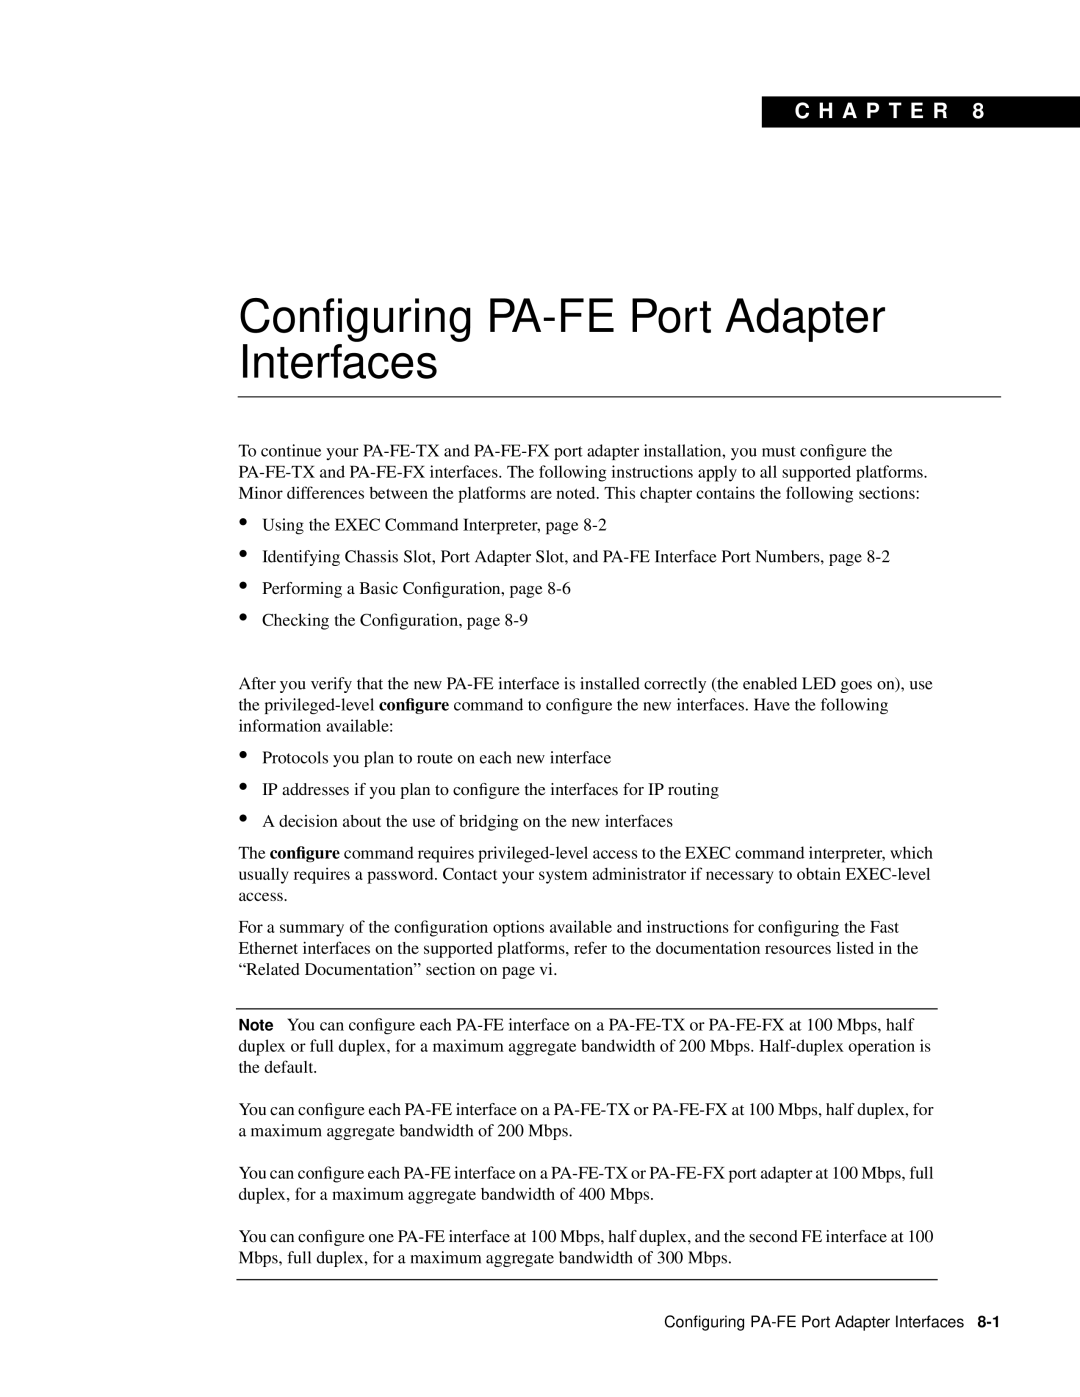 Cisco Systems PA-FE-FX, PA-FE-TX manual Configuring PA-FE Port Adapter Interfaces, C H A P T E R 